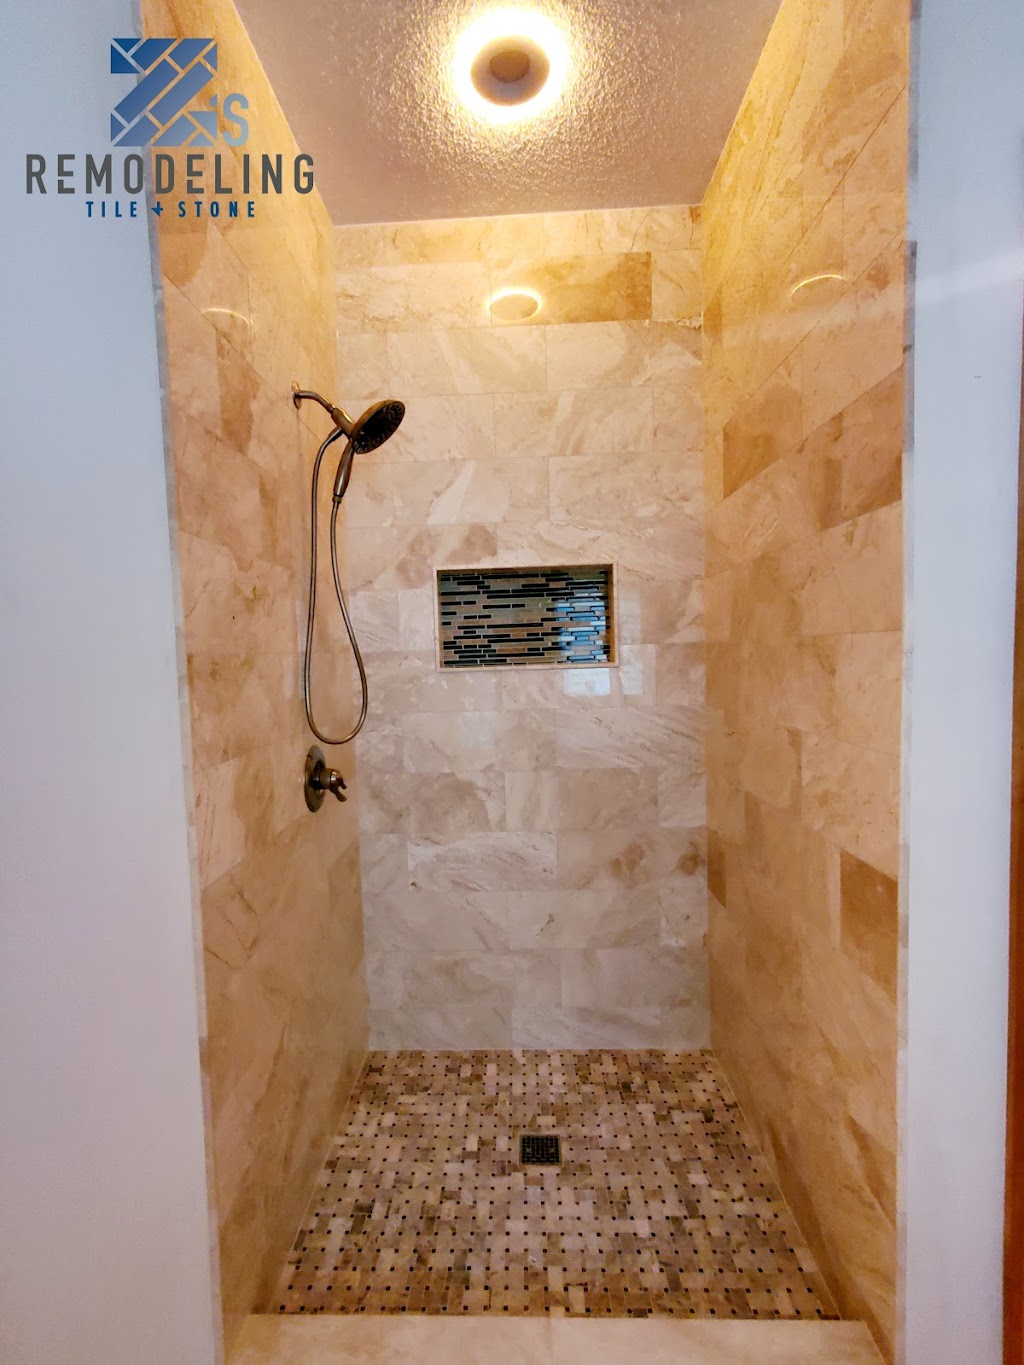 Zs Remodeling Tile & Stone | 22500 Zion Pkwy NW, Oak Grove, MN 55303 | Phone: (651) 335-2059